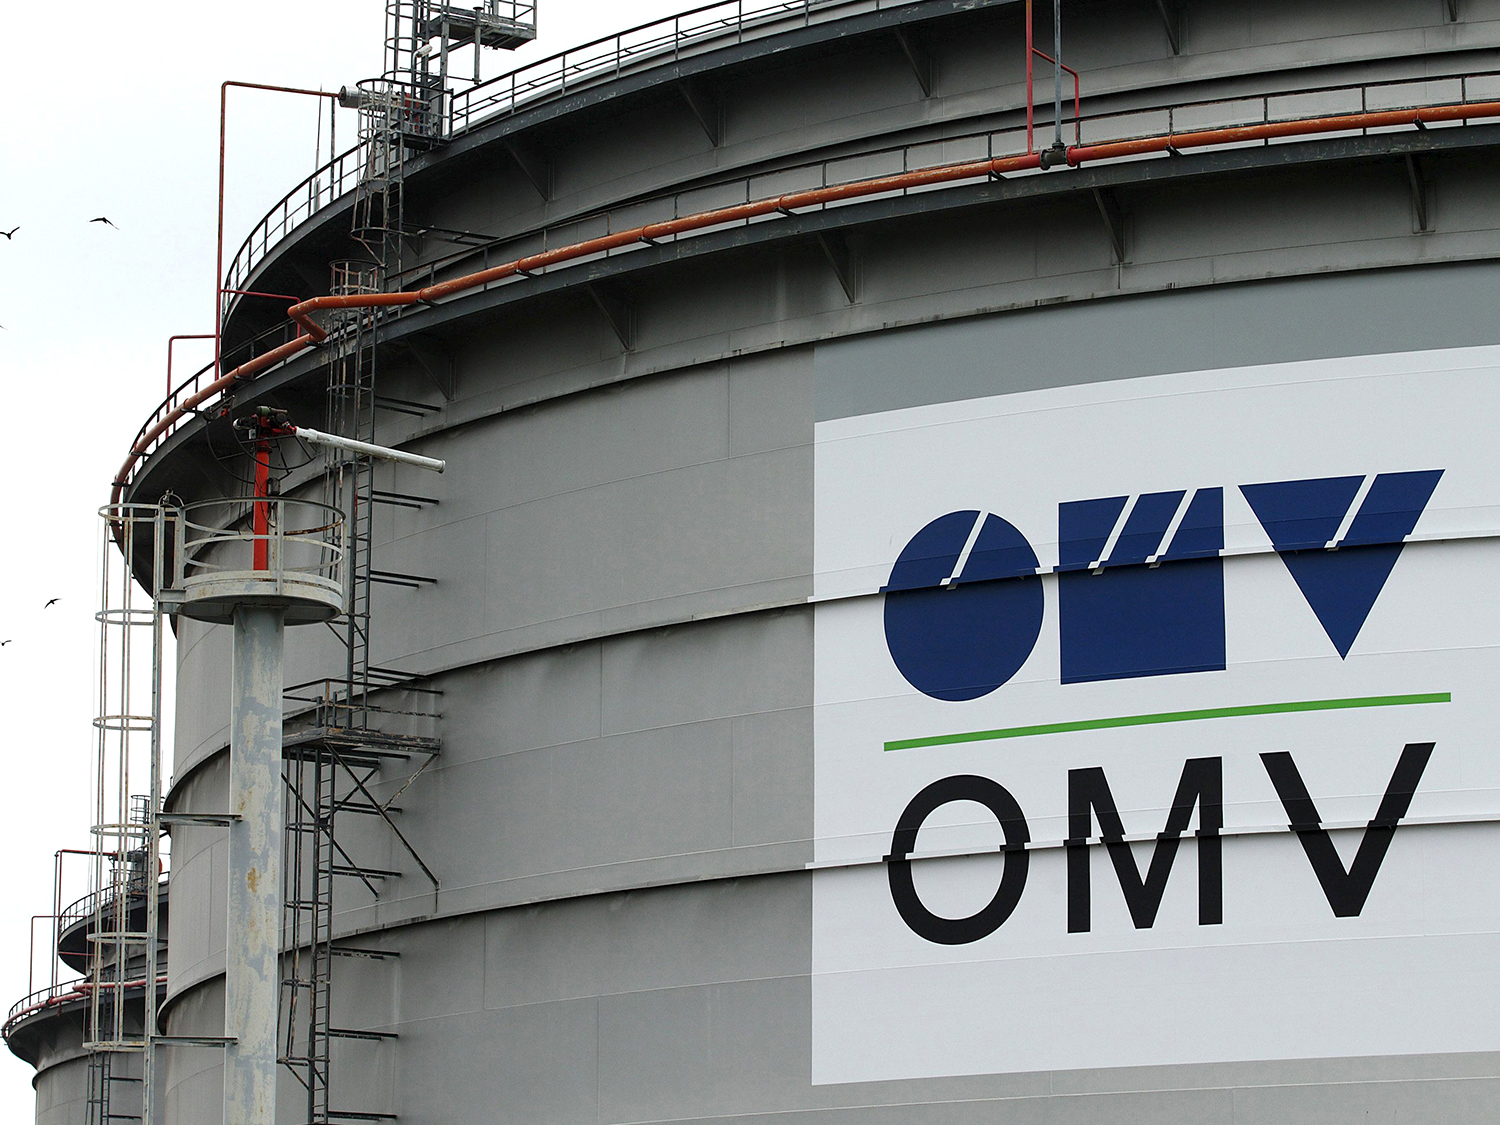 File-photo-of-the-logo-of-Austrian-oil-and-gas-group-OMV-pictured-on-an-oil-tank-at-the-refinery-in-Schwechat_1454094239296905